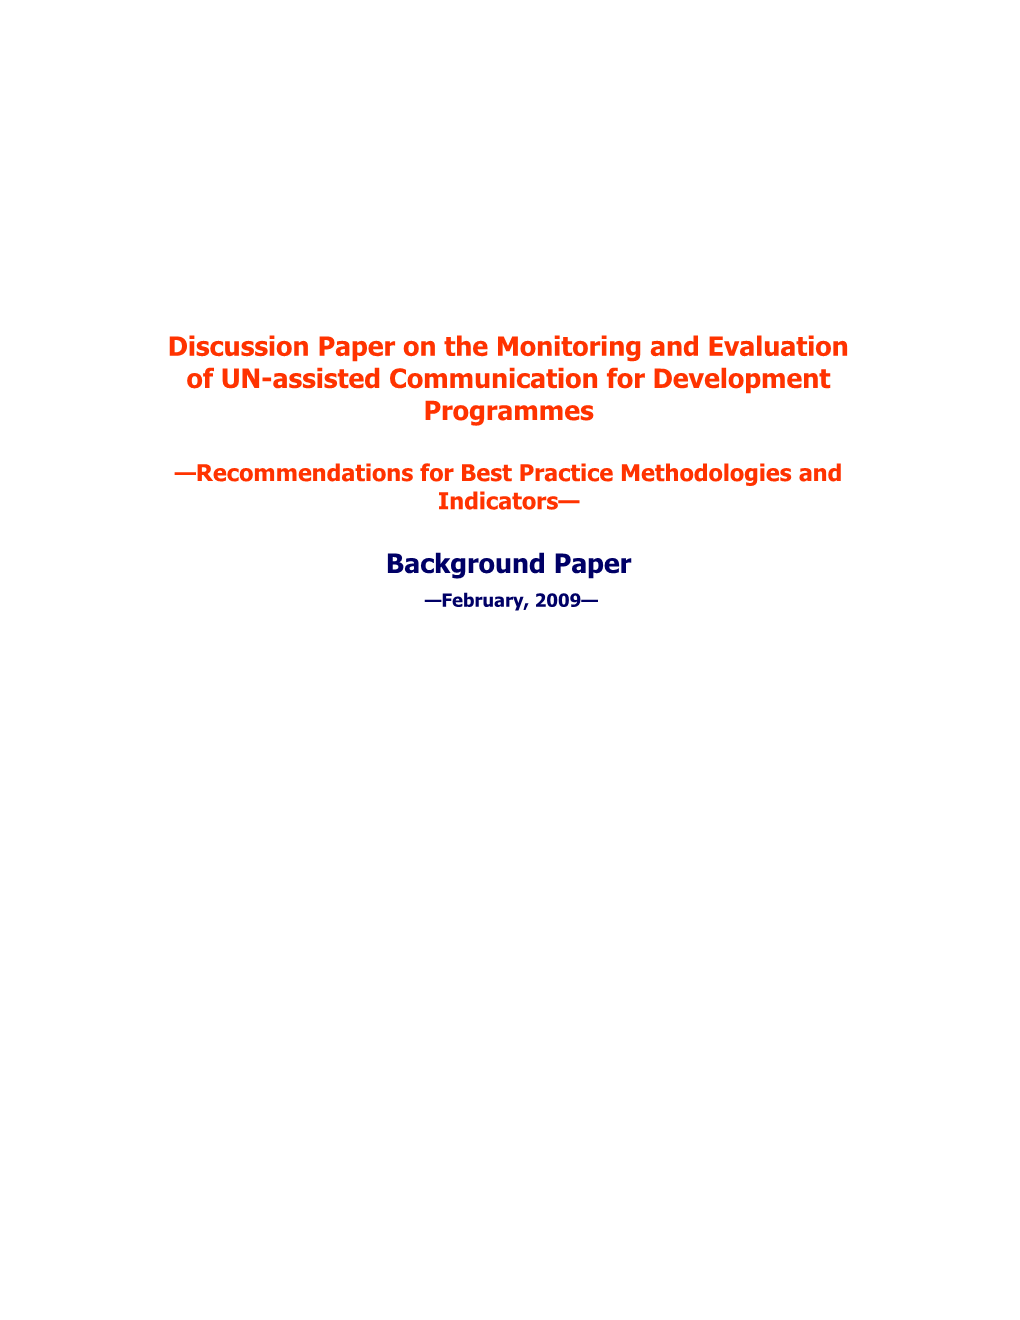 Discussion Paper on the Monitoring and Evaluation of UN-Assisted Communication for Development